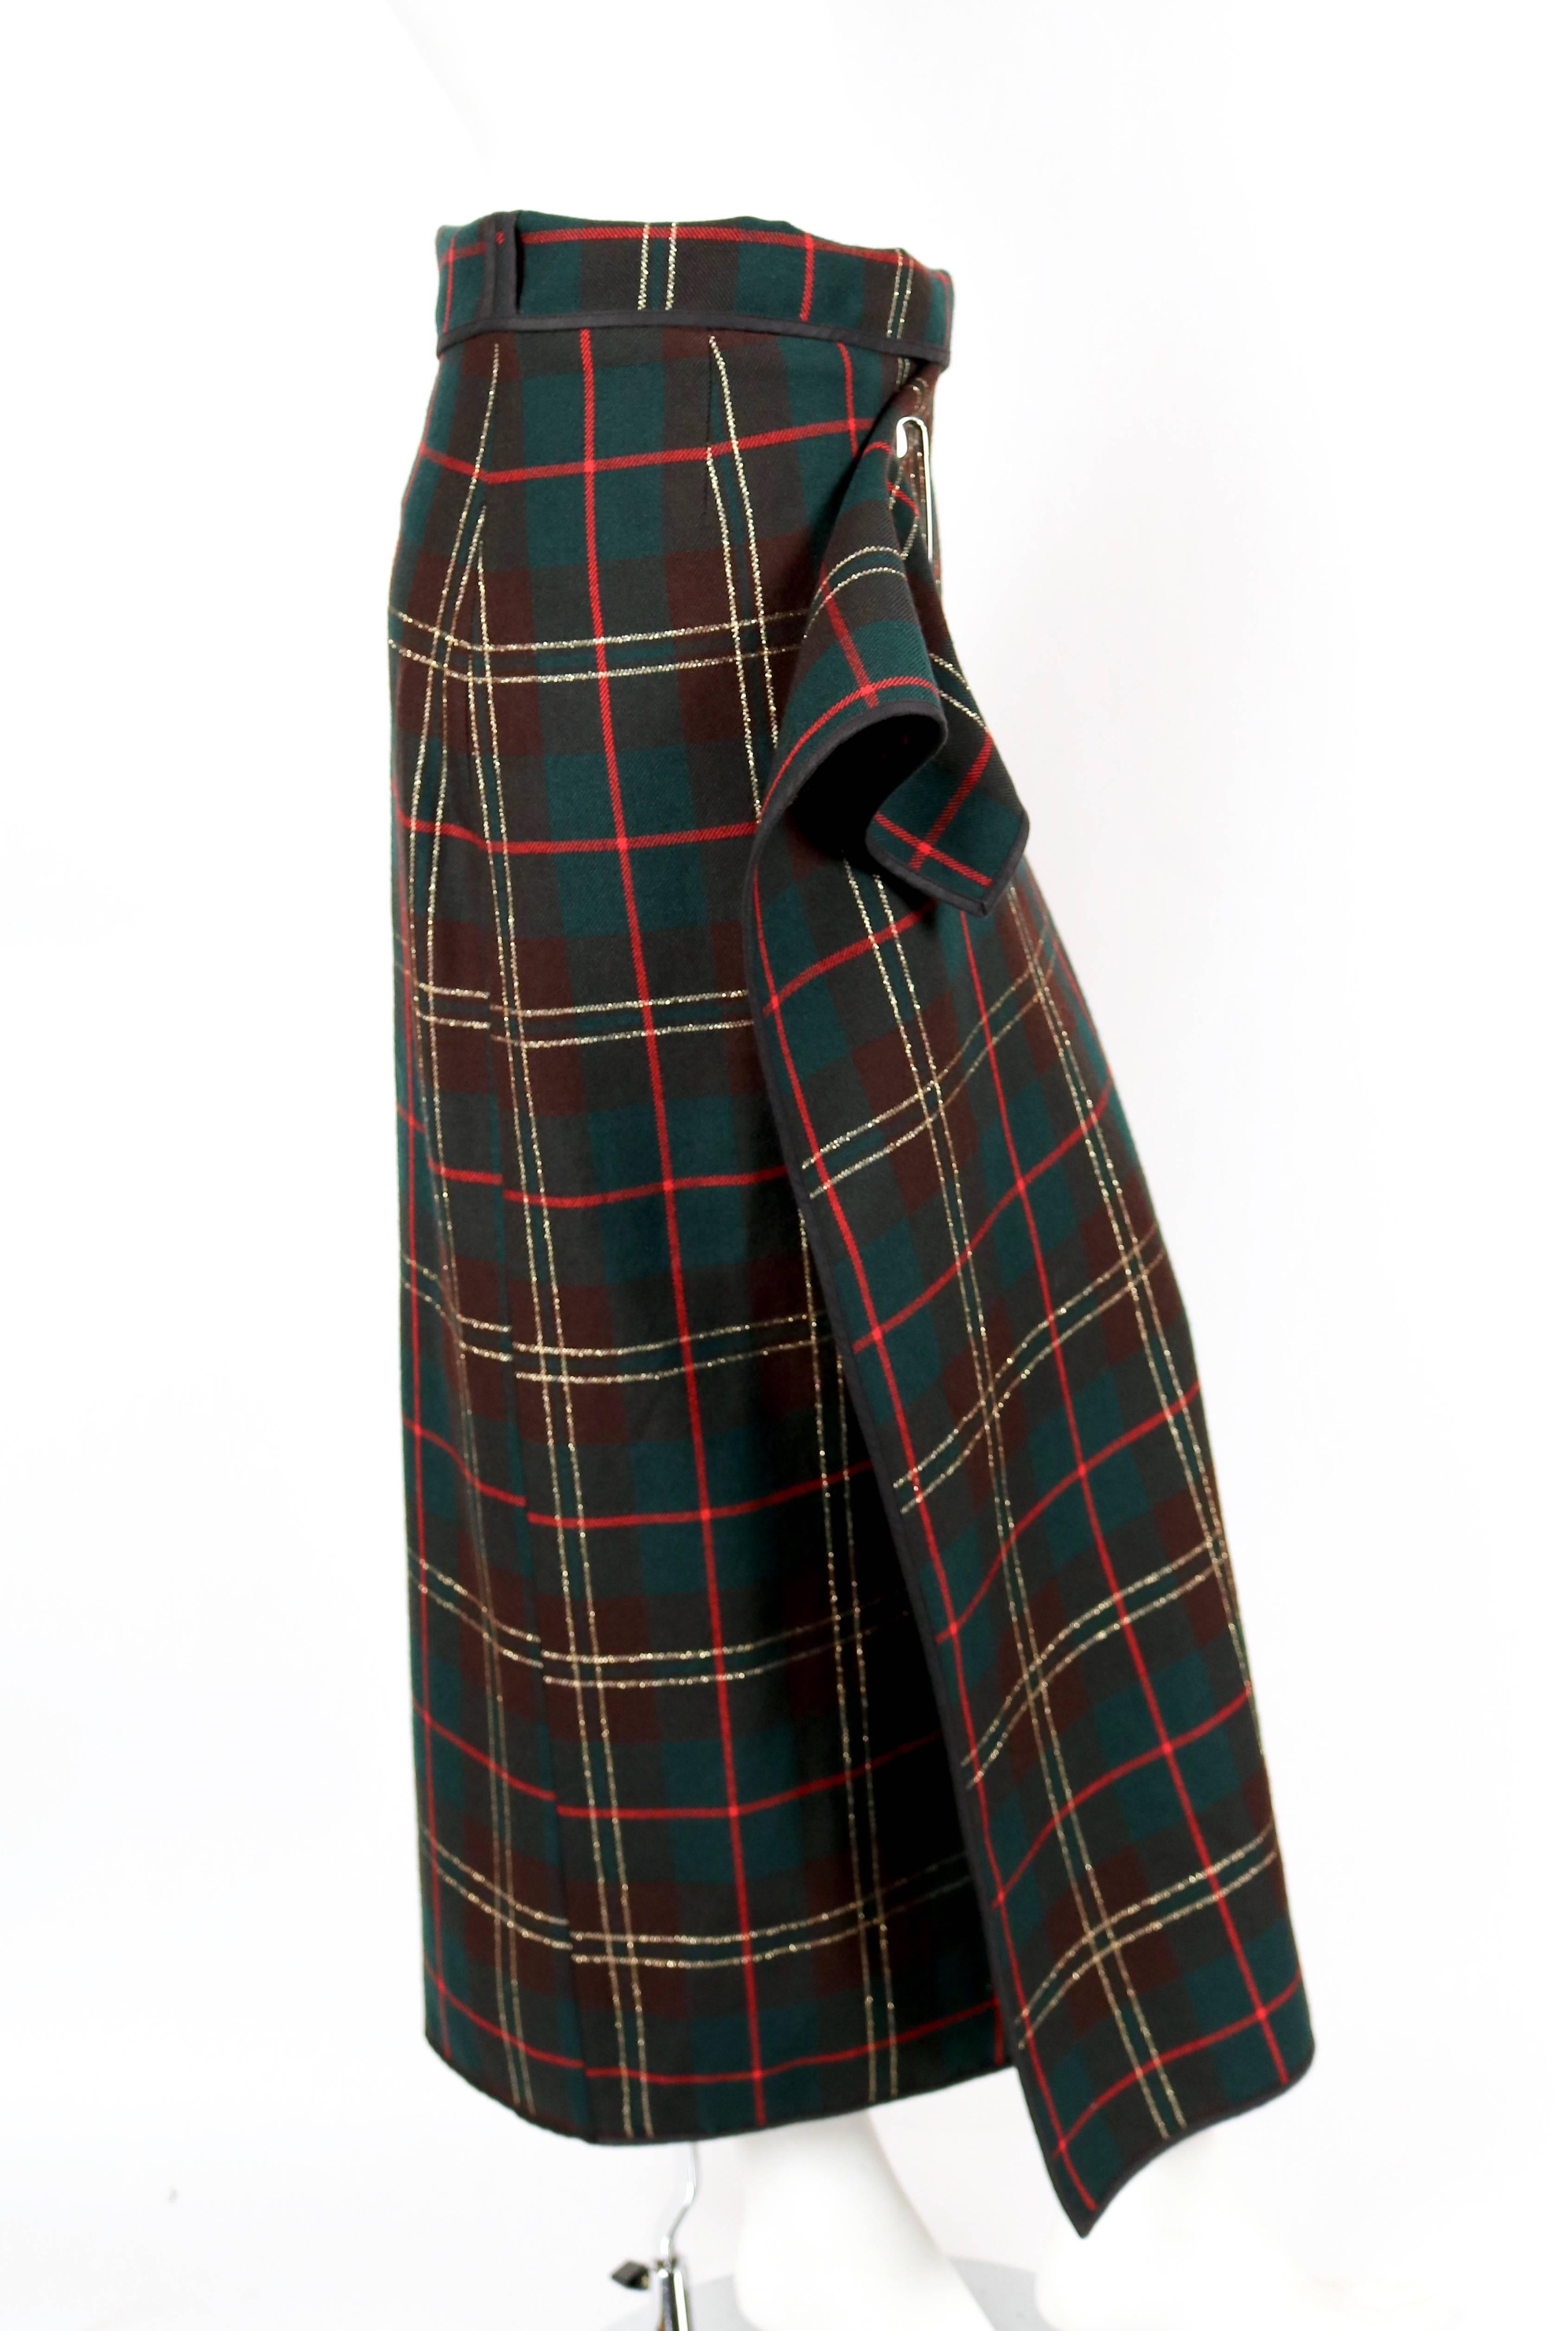 Tartan wool wrap skirt accented with lurex and secured with a safety pin designed by Rei Kawakubo for Comme Des Garcons dating to fall of 1999. No size label. Skirt is a rectangle measuring 52.5